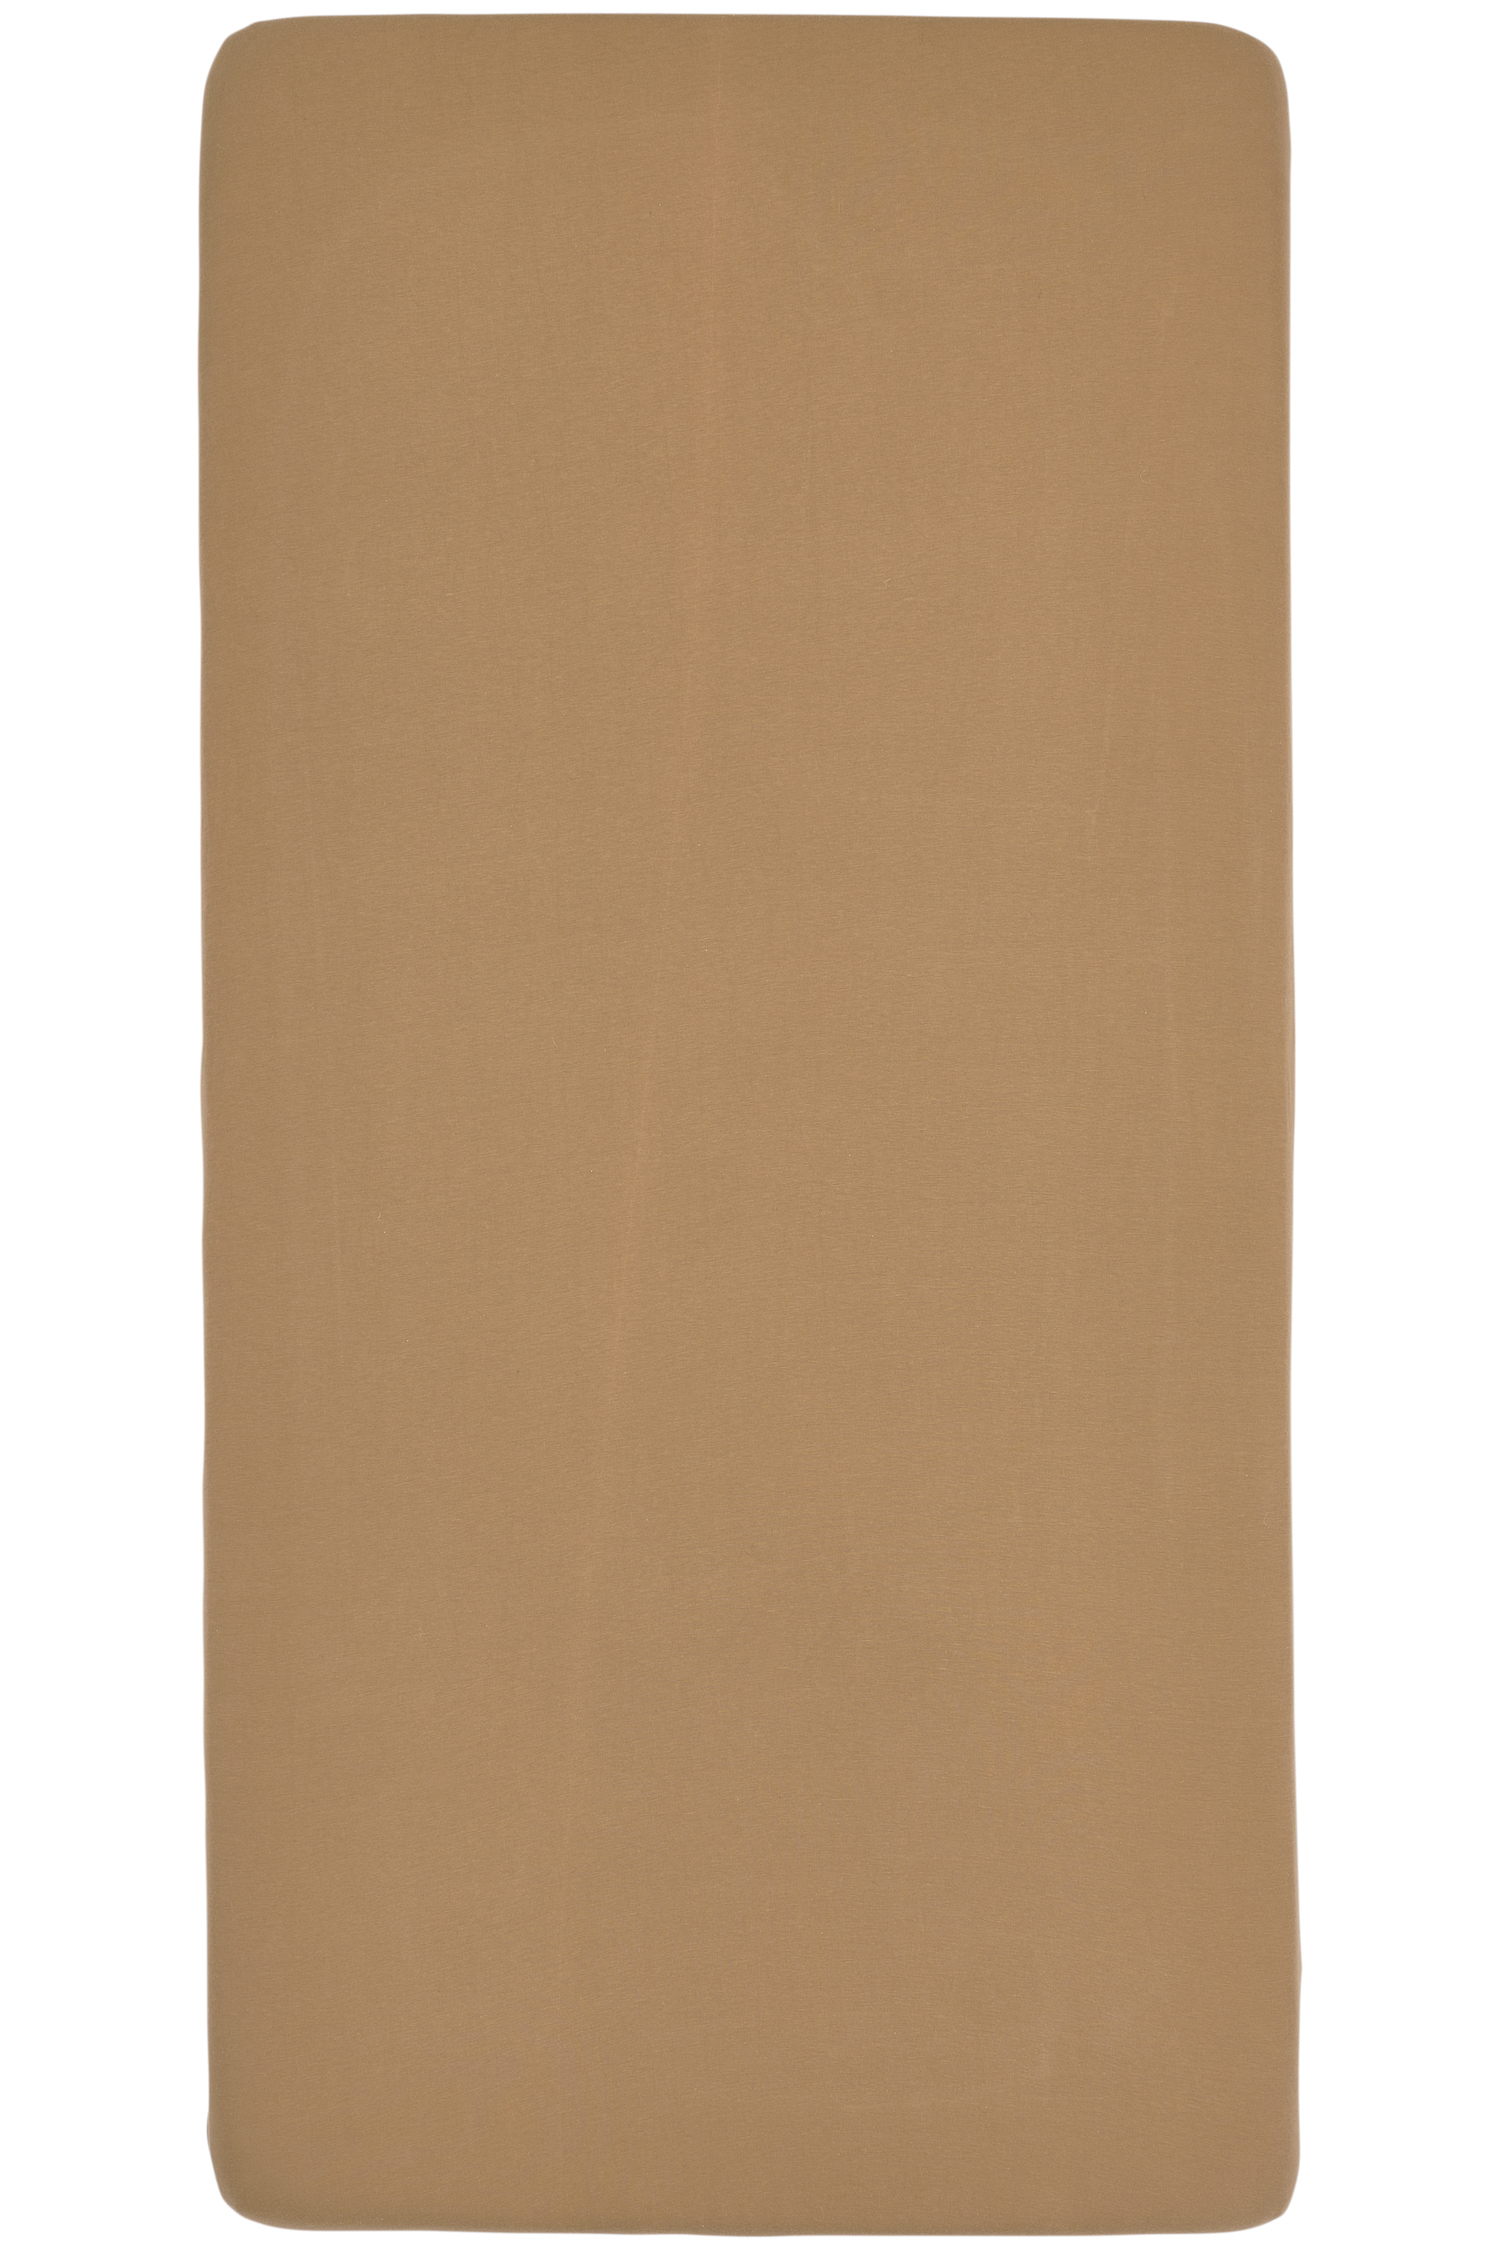 Fitted sheet 1-Pers. Uni - toffee - 90x210/220cm